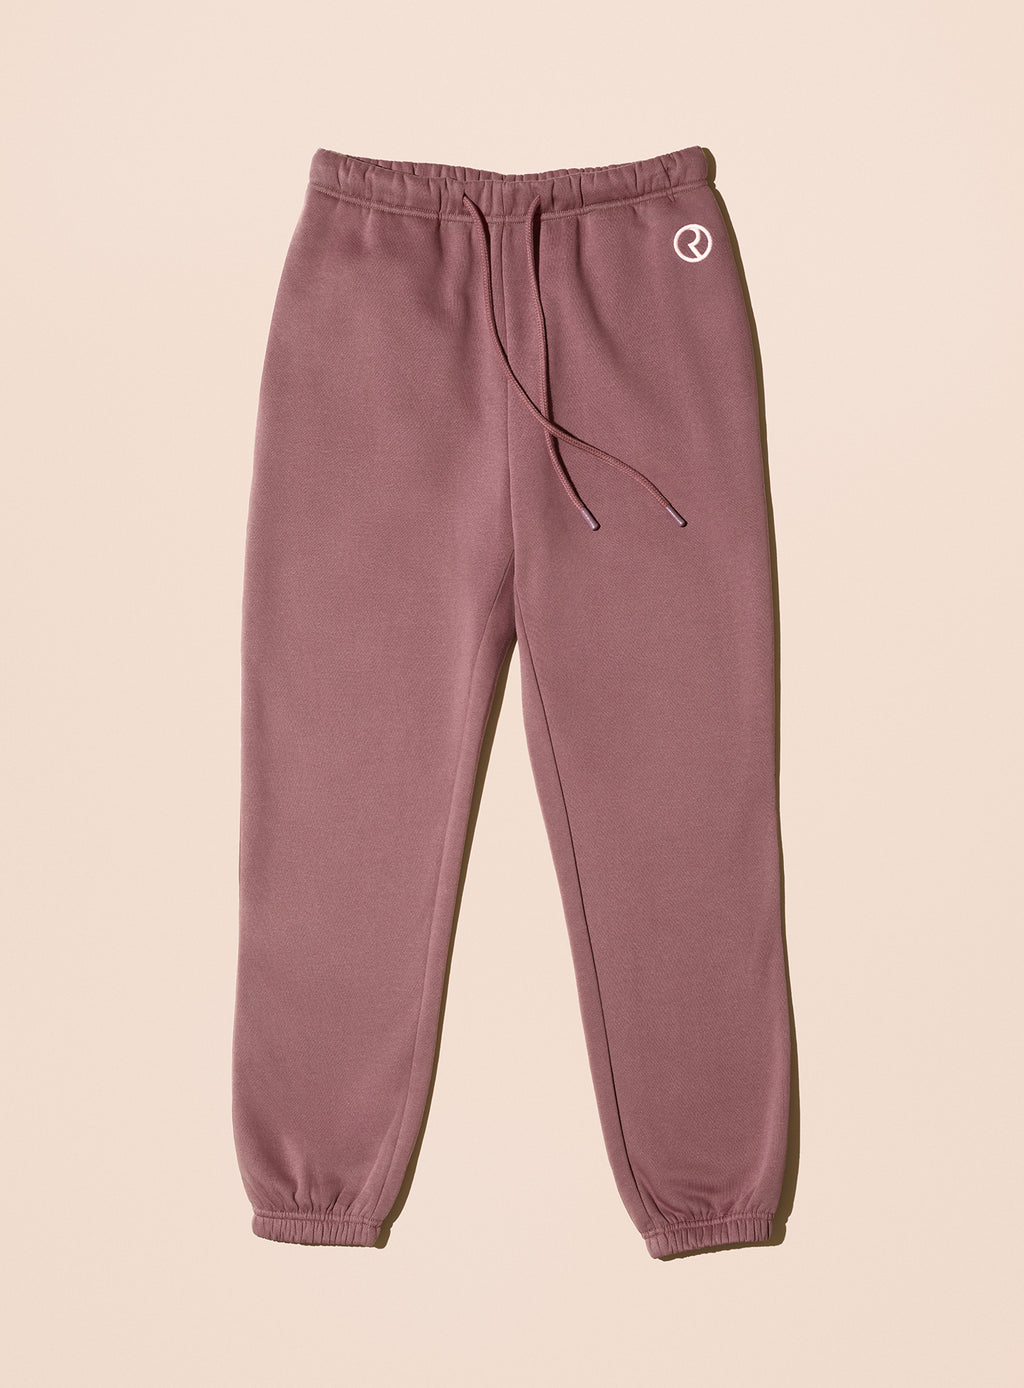 These Comfy Sweatpants Just Got Restocked